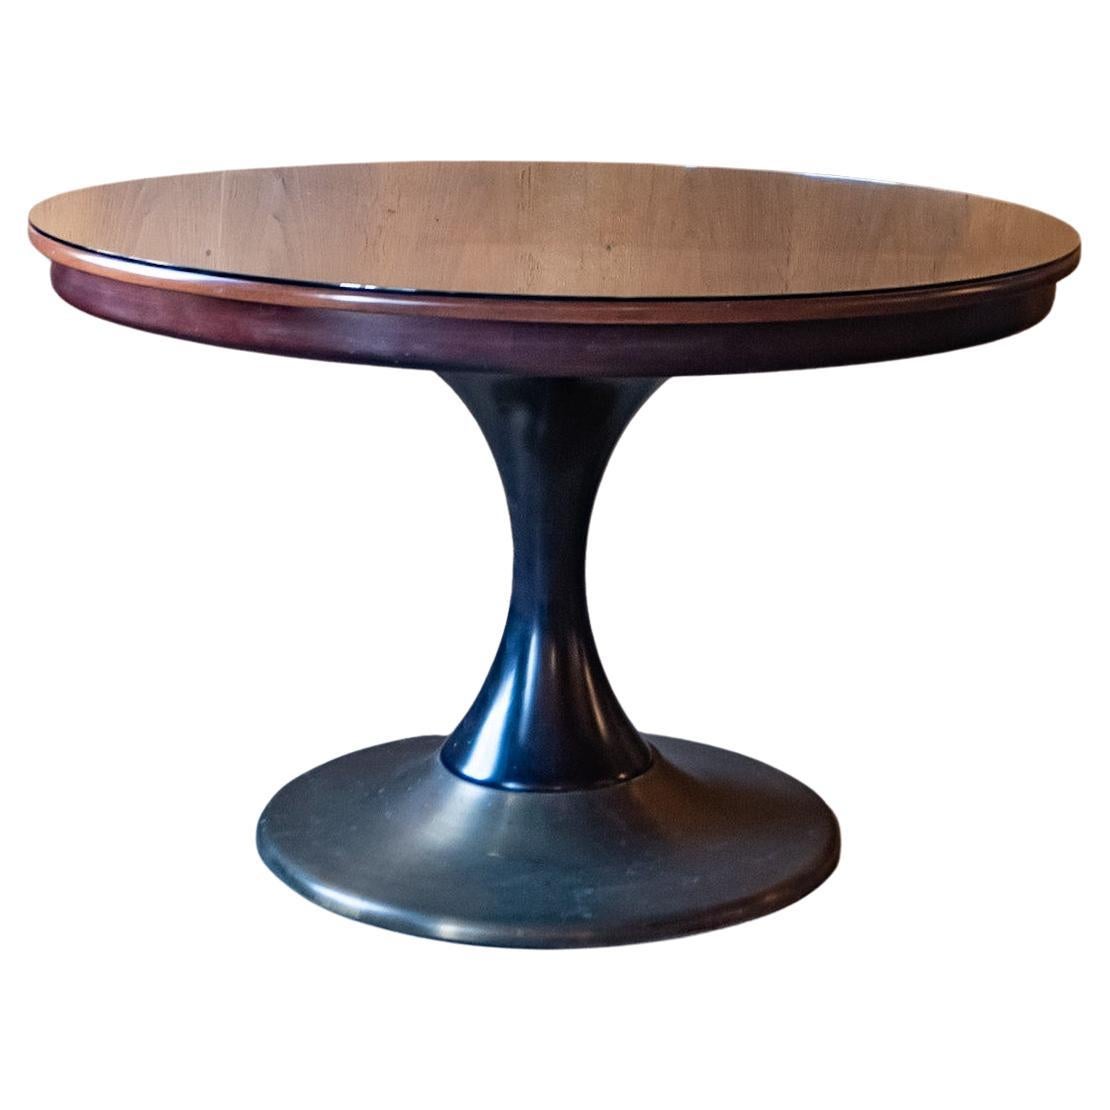 Mid-Century Modern Round Wooden Brass Dining Table, Italy, 1950s For Sale